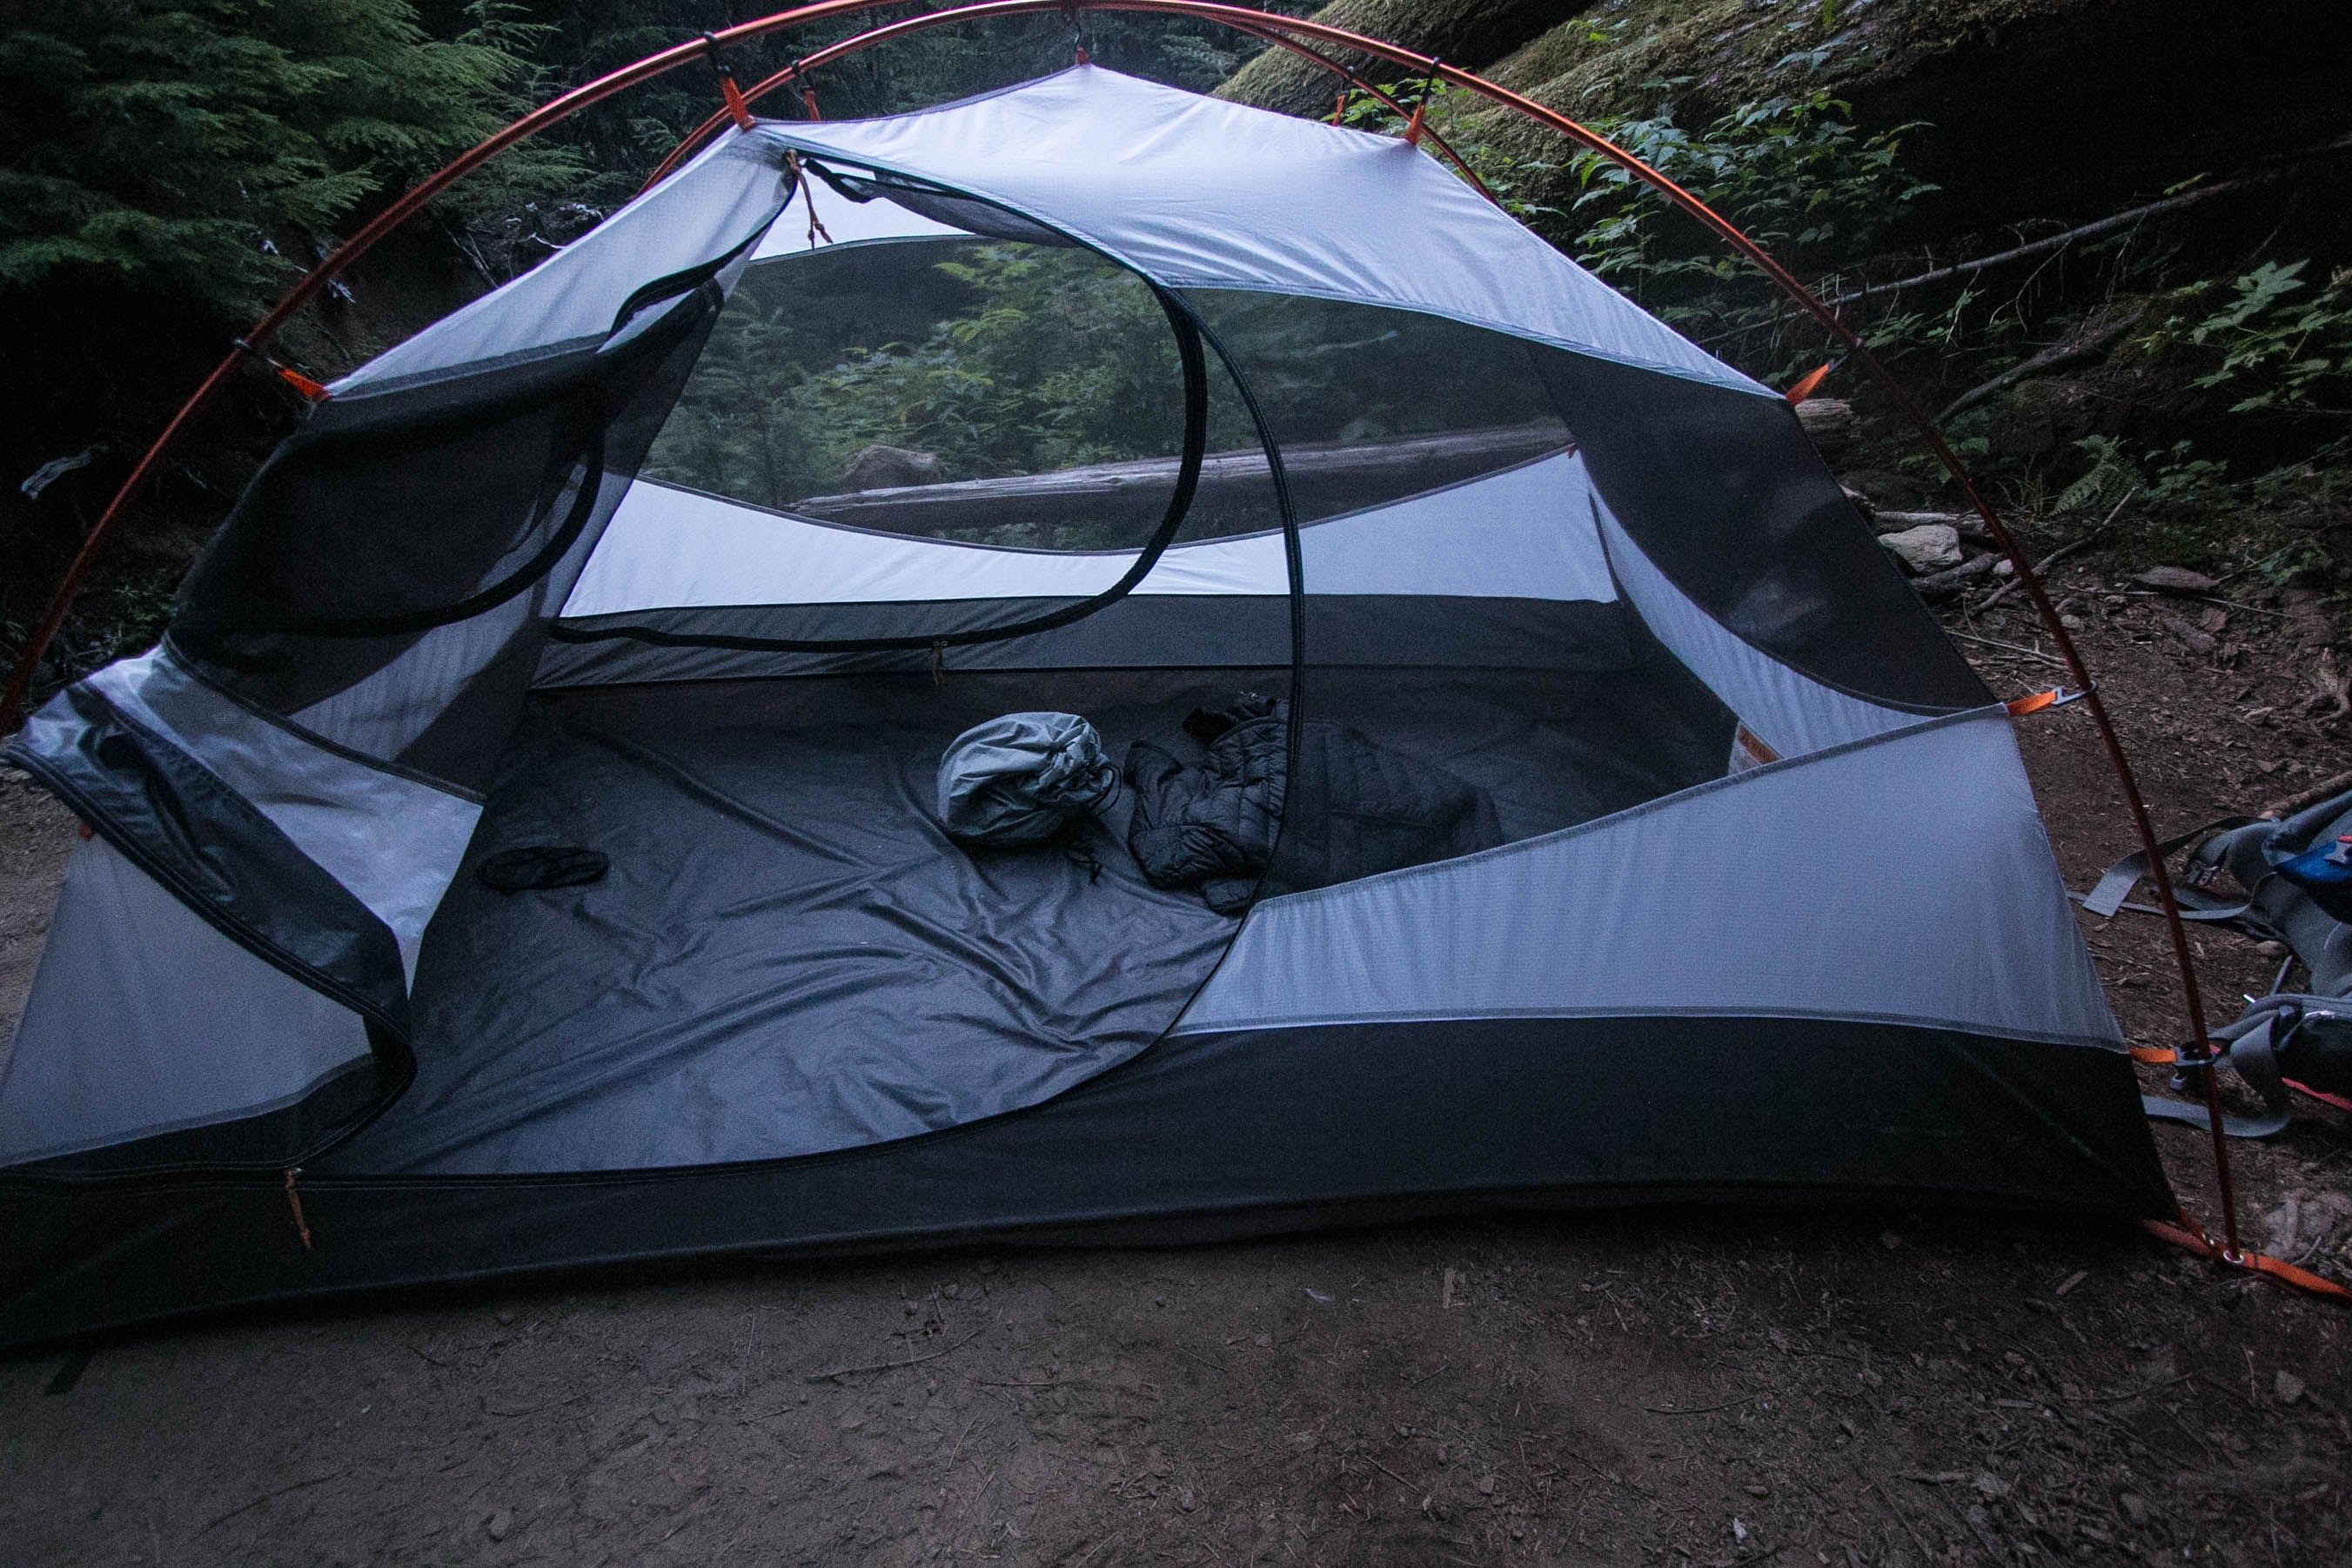 The ground was super hard and flat.  Perfect for tent camping.